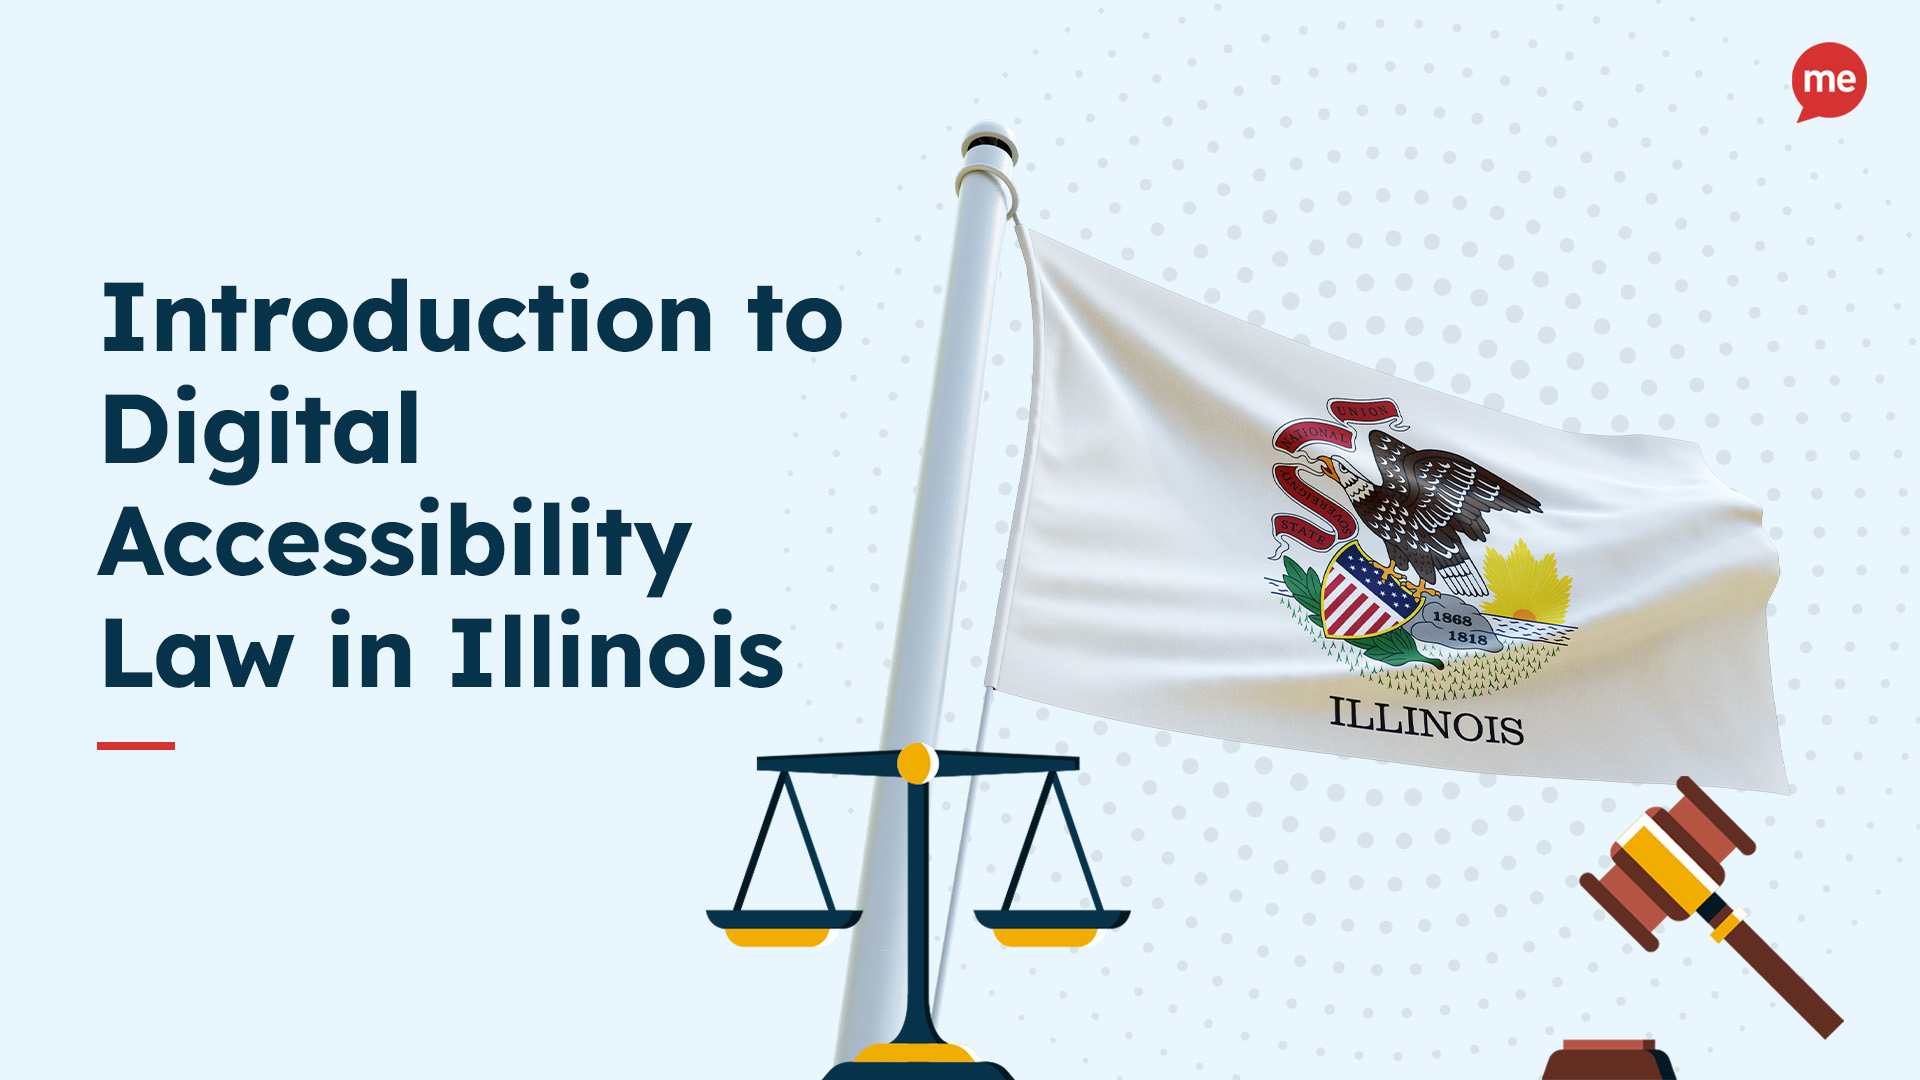 Introduction to Digital Accessibility Law in Illinois